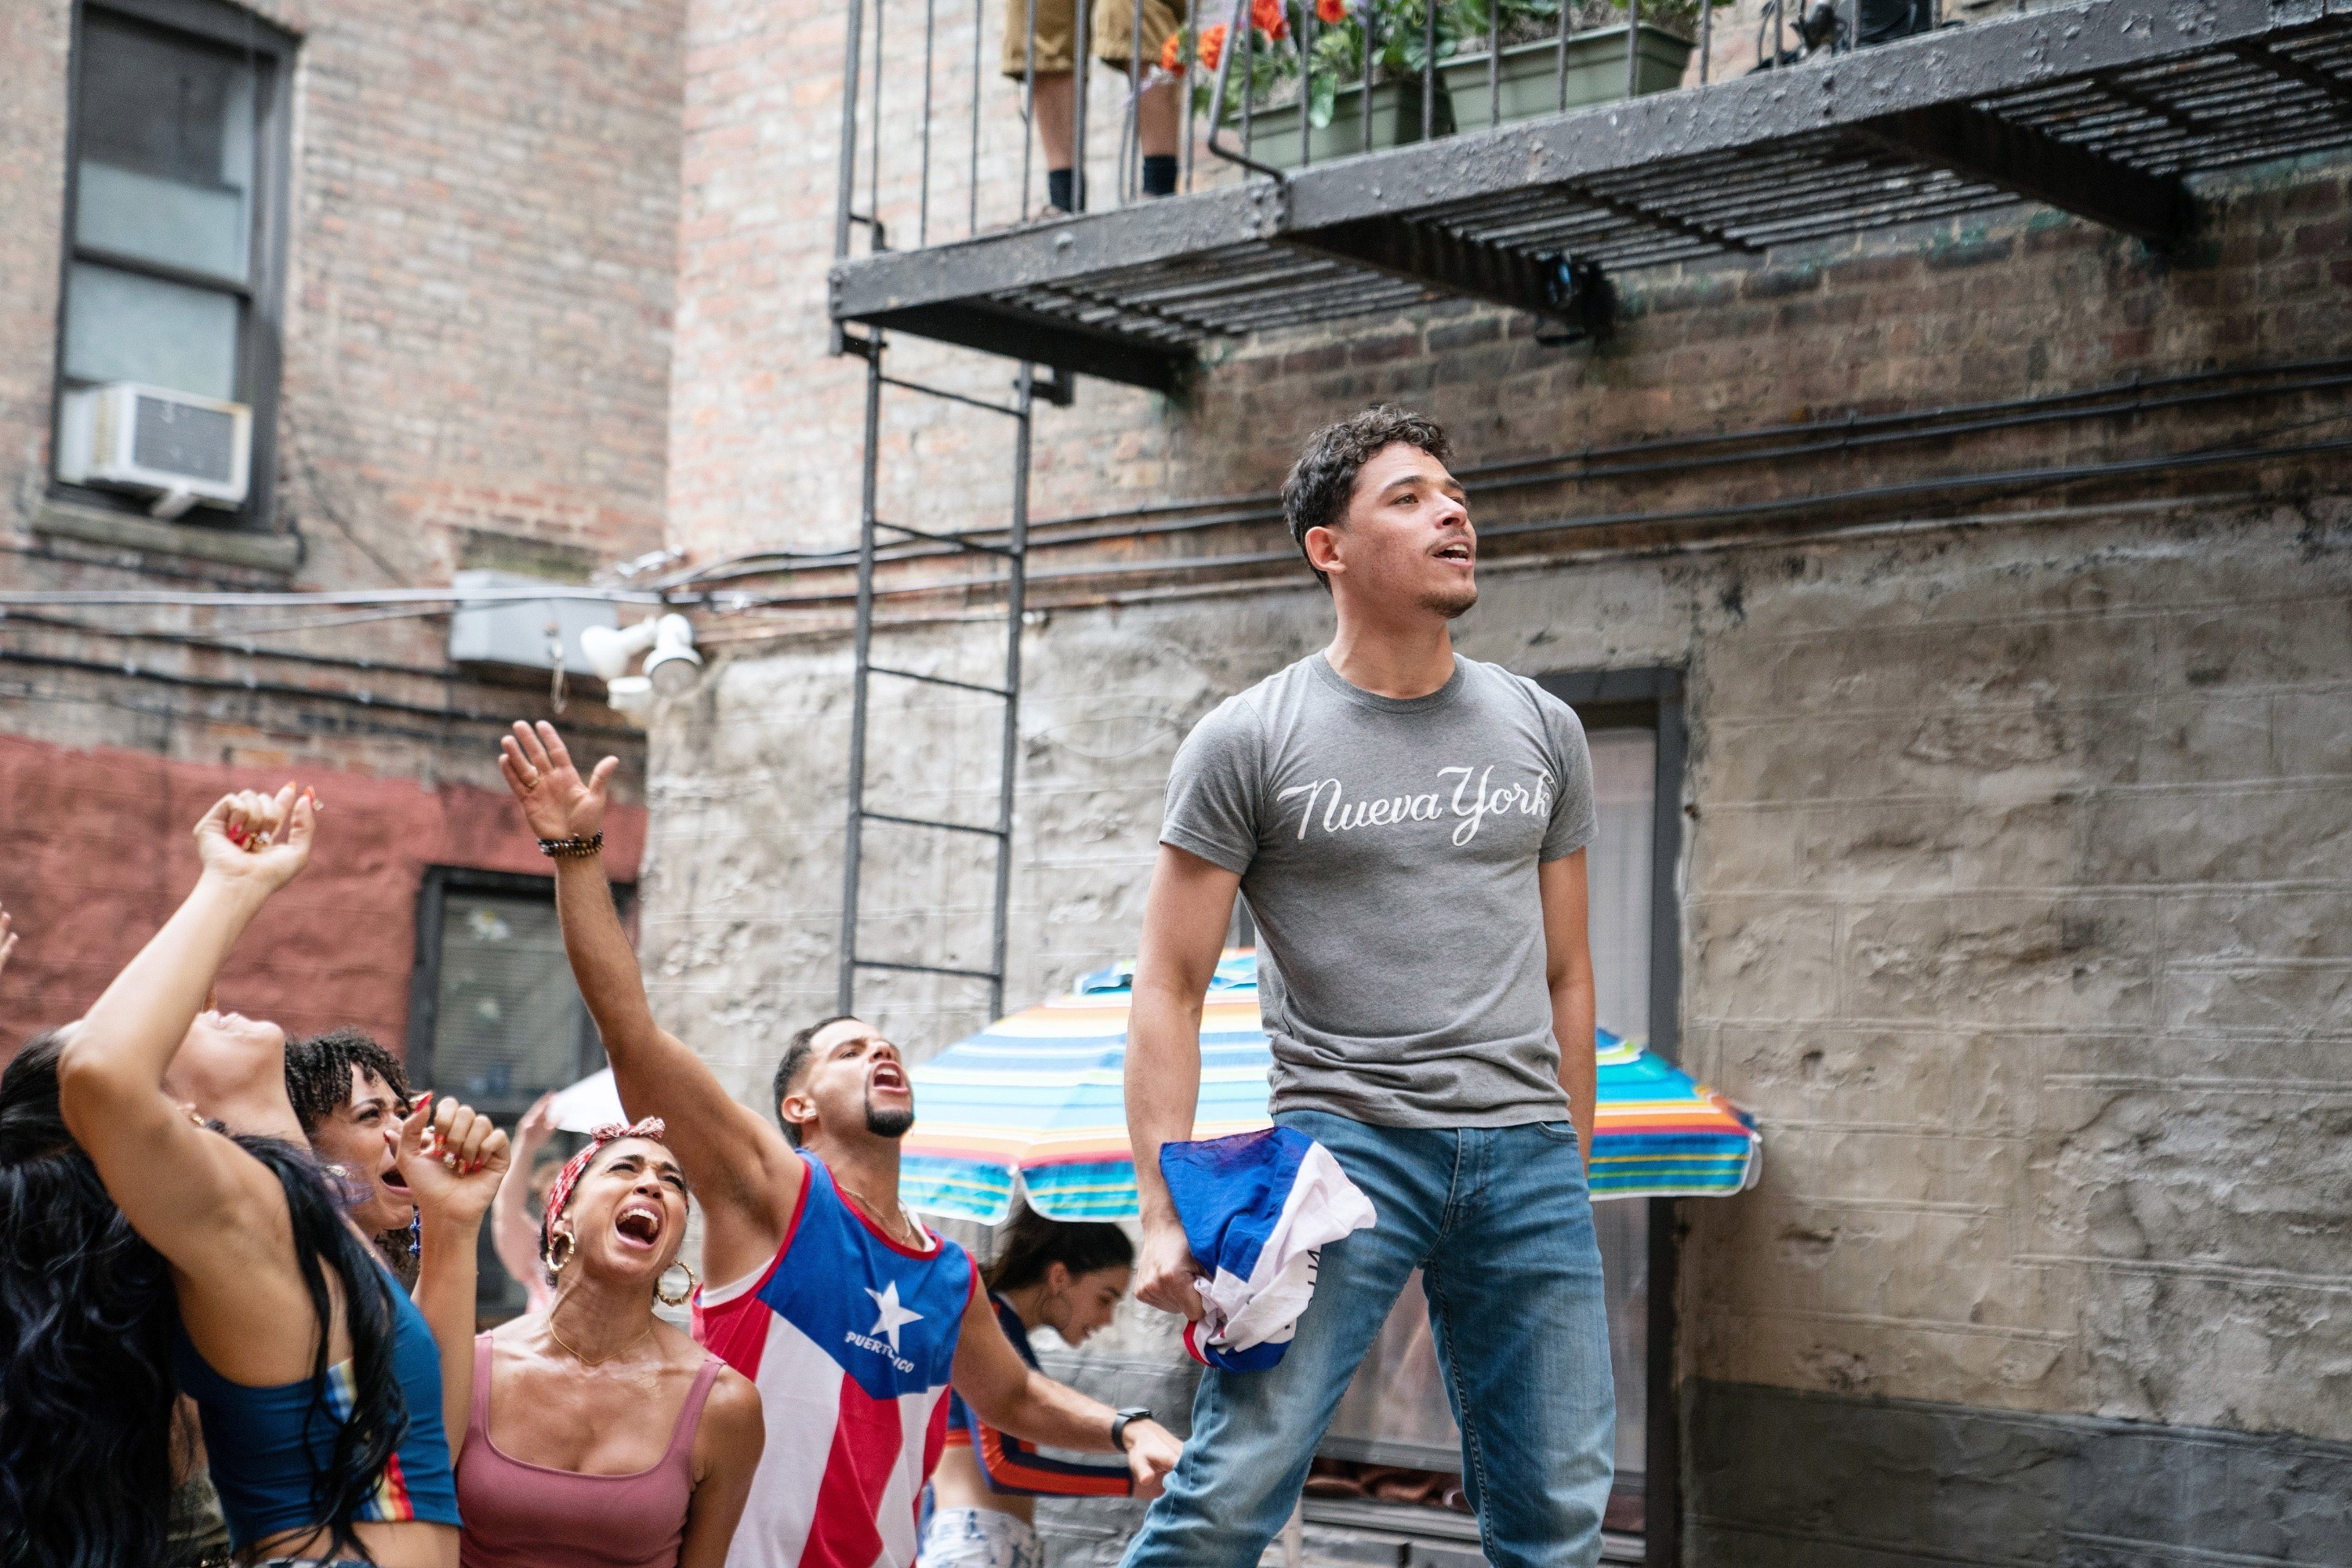 Anthony Ramos stands on a podium singing